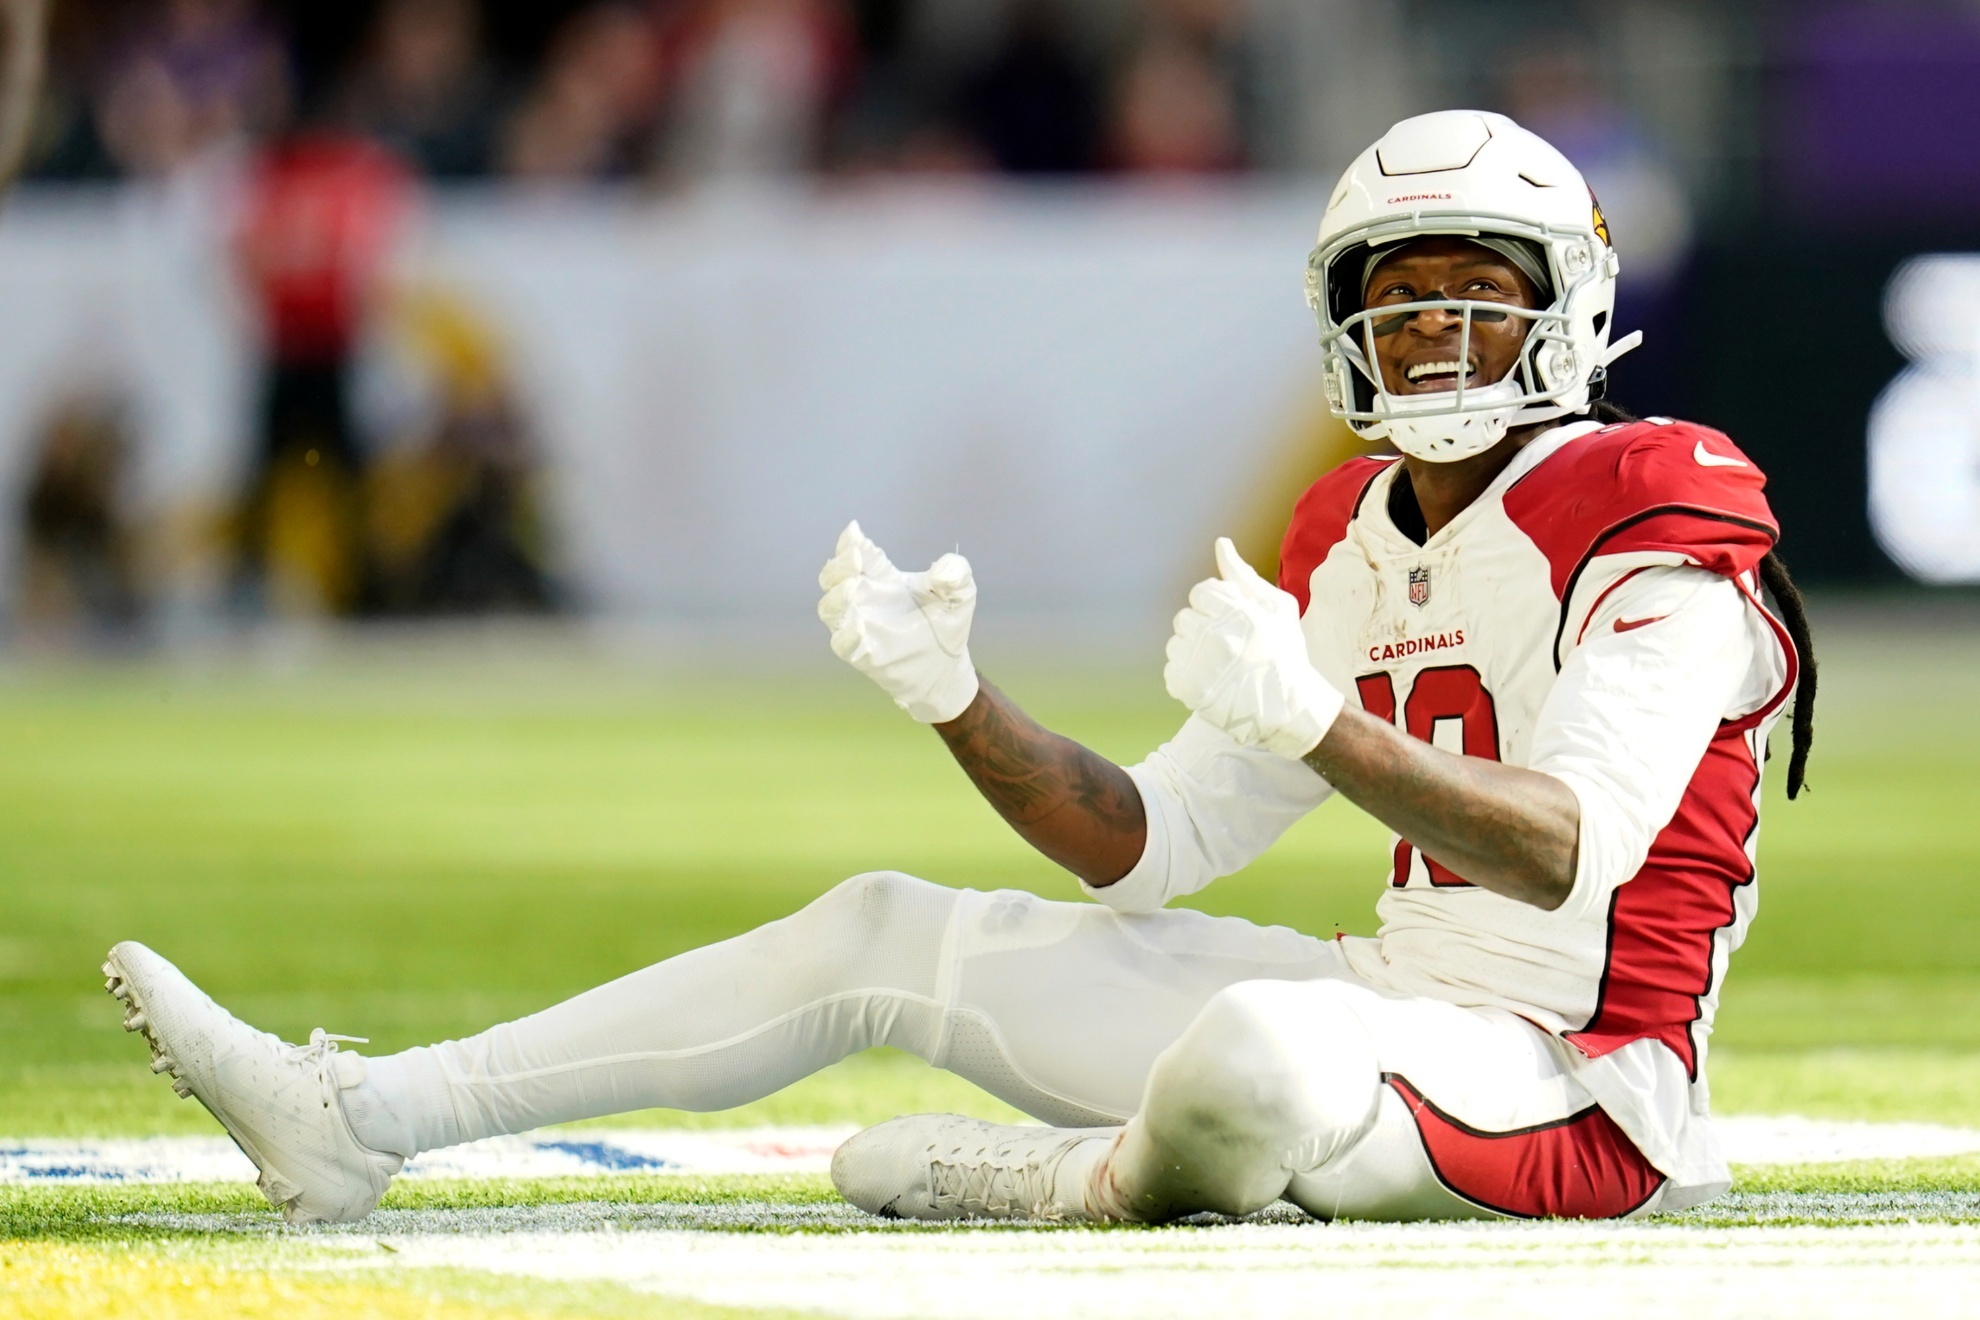 Which NFL team will DeAndre Hopkins play for next season?